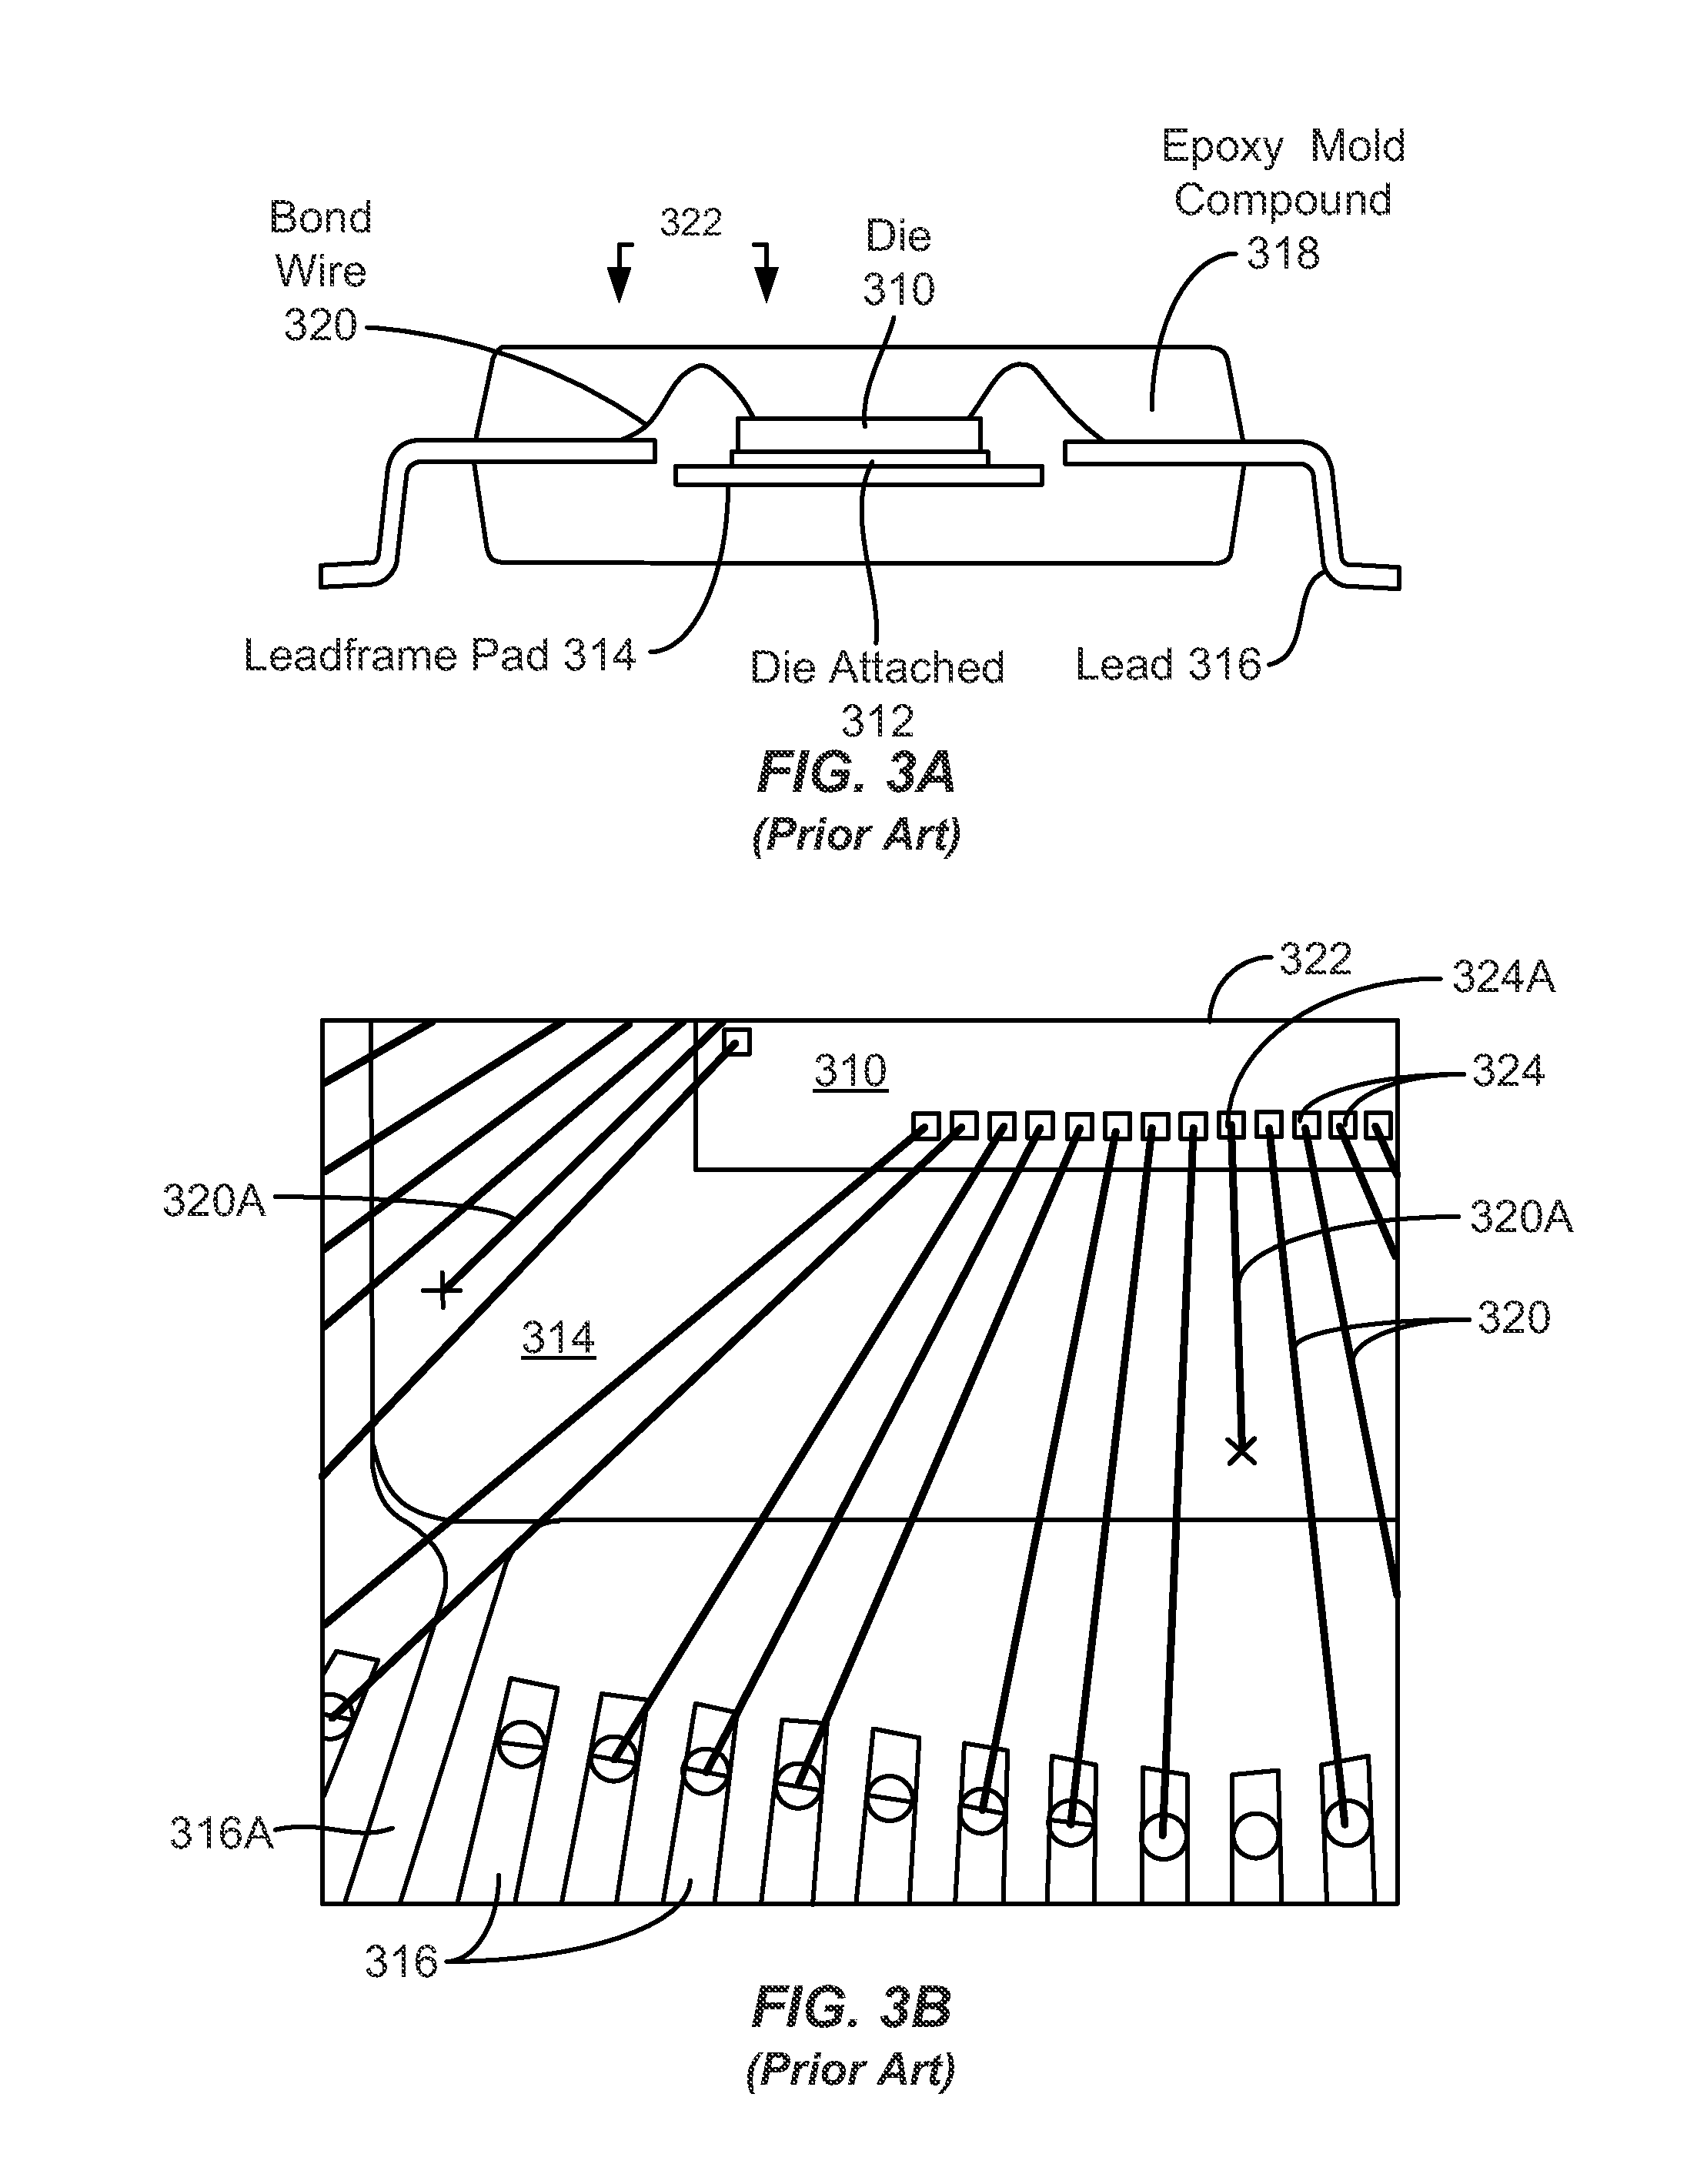 Latch-up suppression and substrate noise coupling reduction through a substrate back-tie for 3D integrated circuits